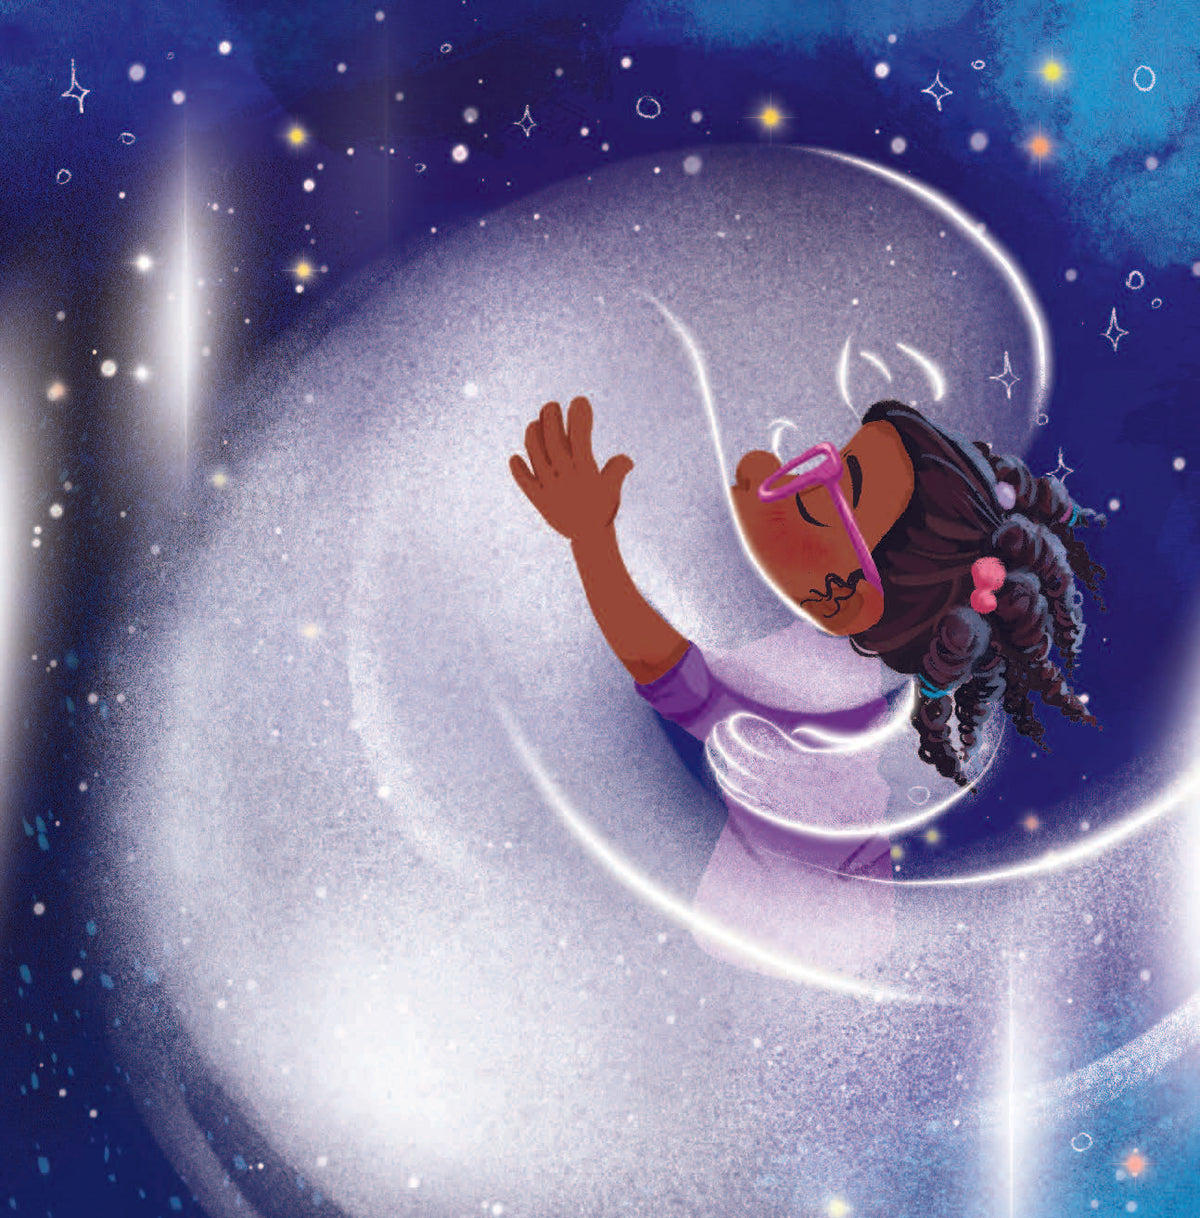 Always There: A Children's Book About Healing From Grief - Author Krystaelynne Sanders Diggs [Body Safety]